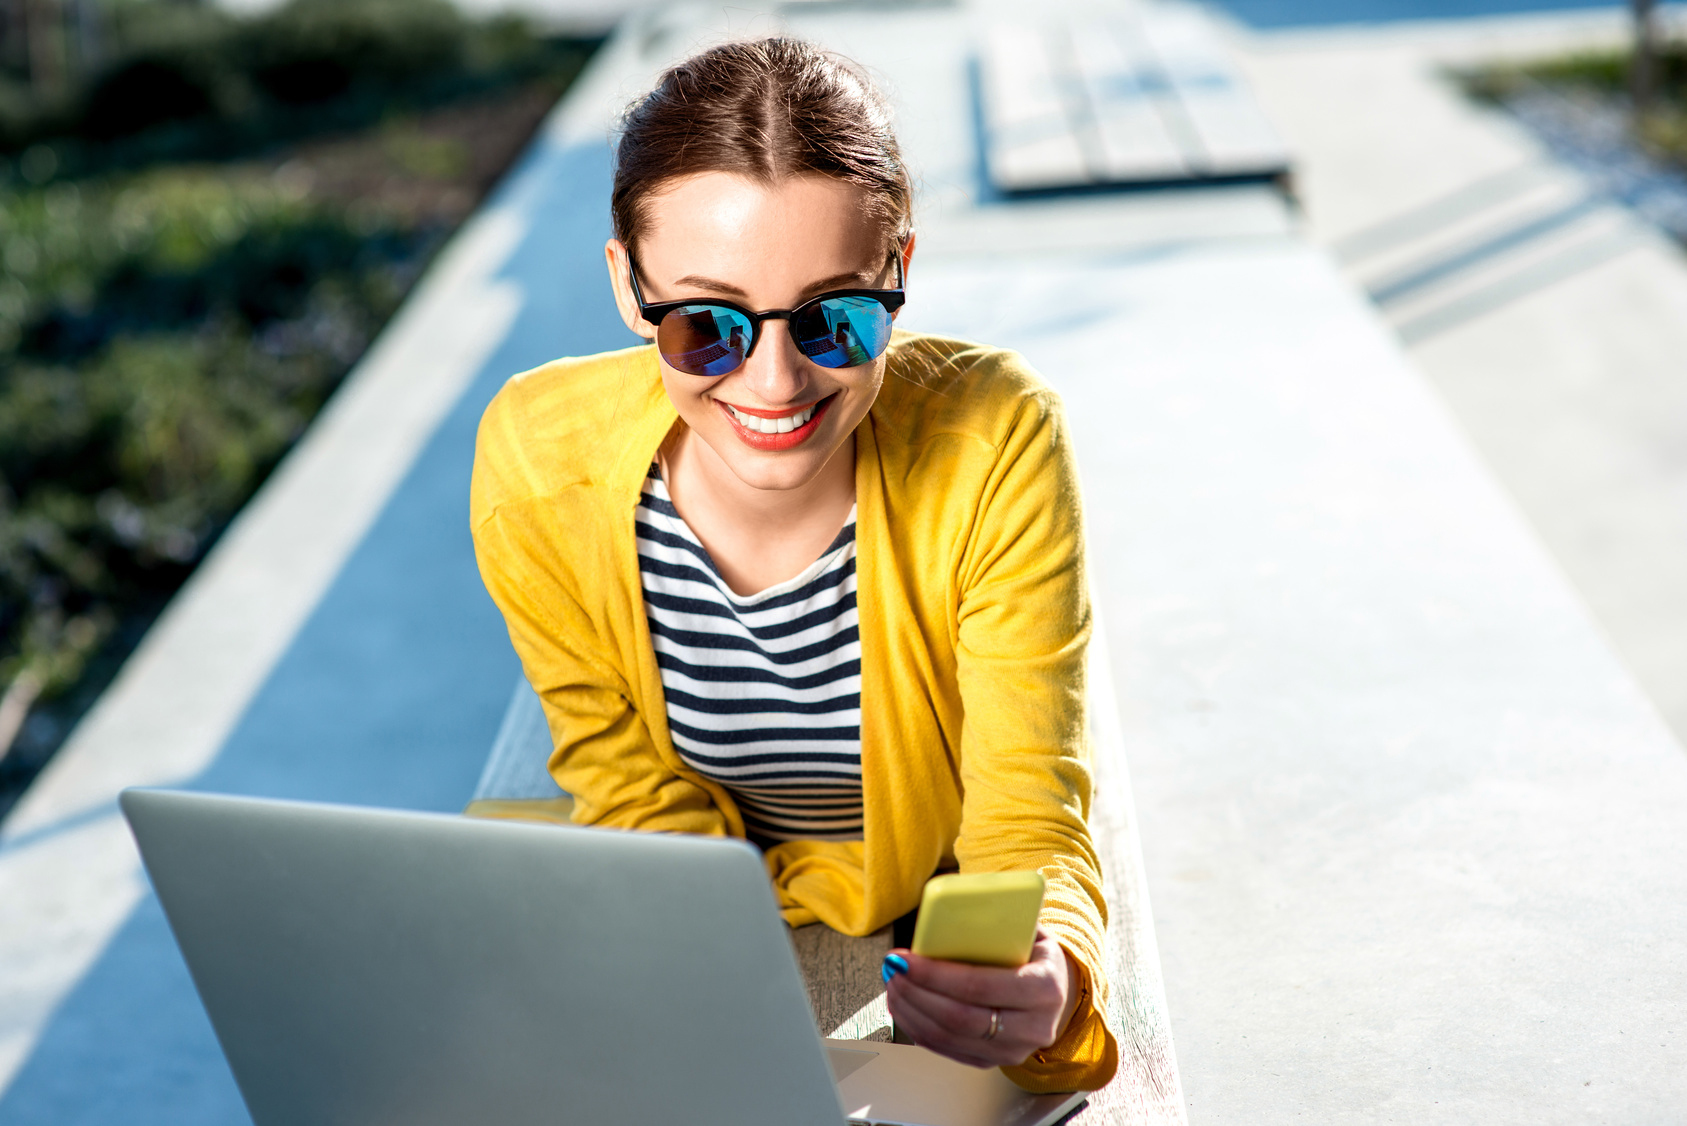 Woman with laptop and phone outdoors